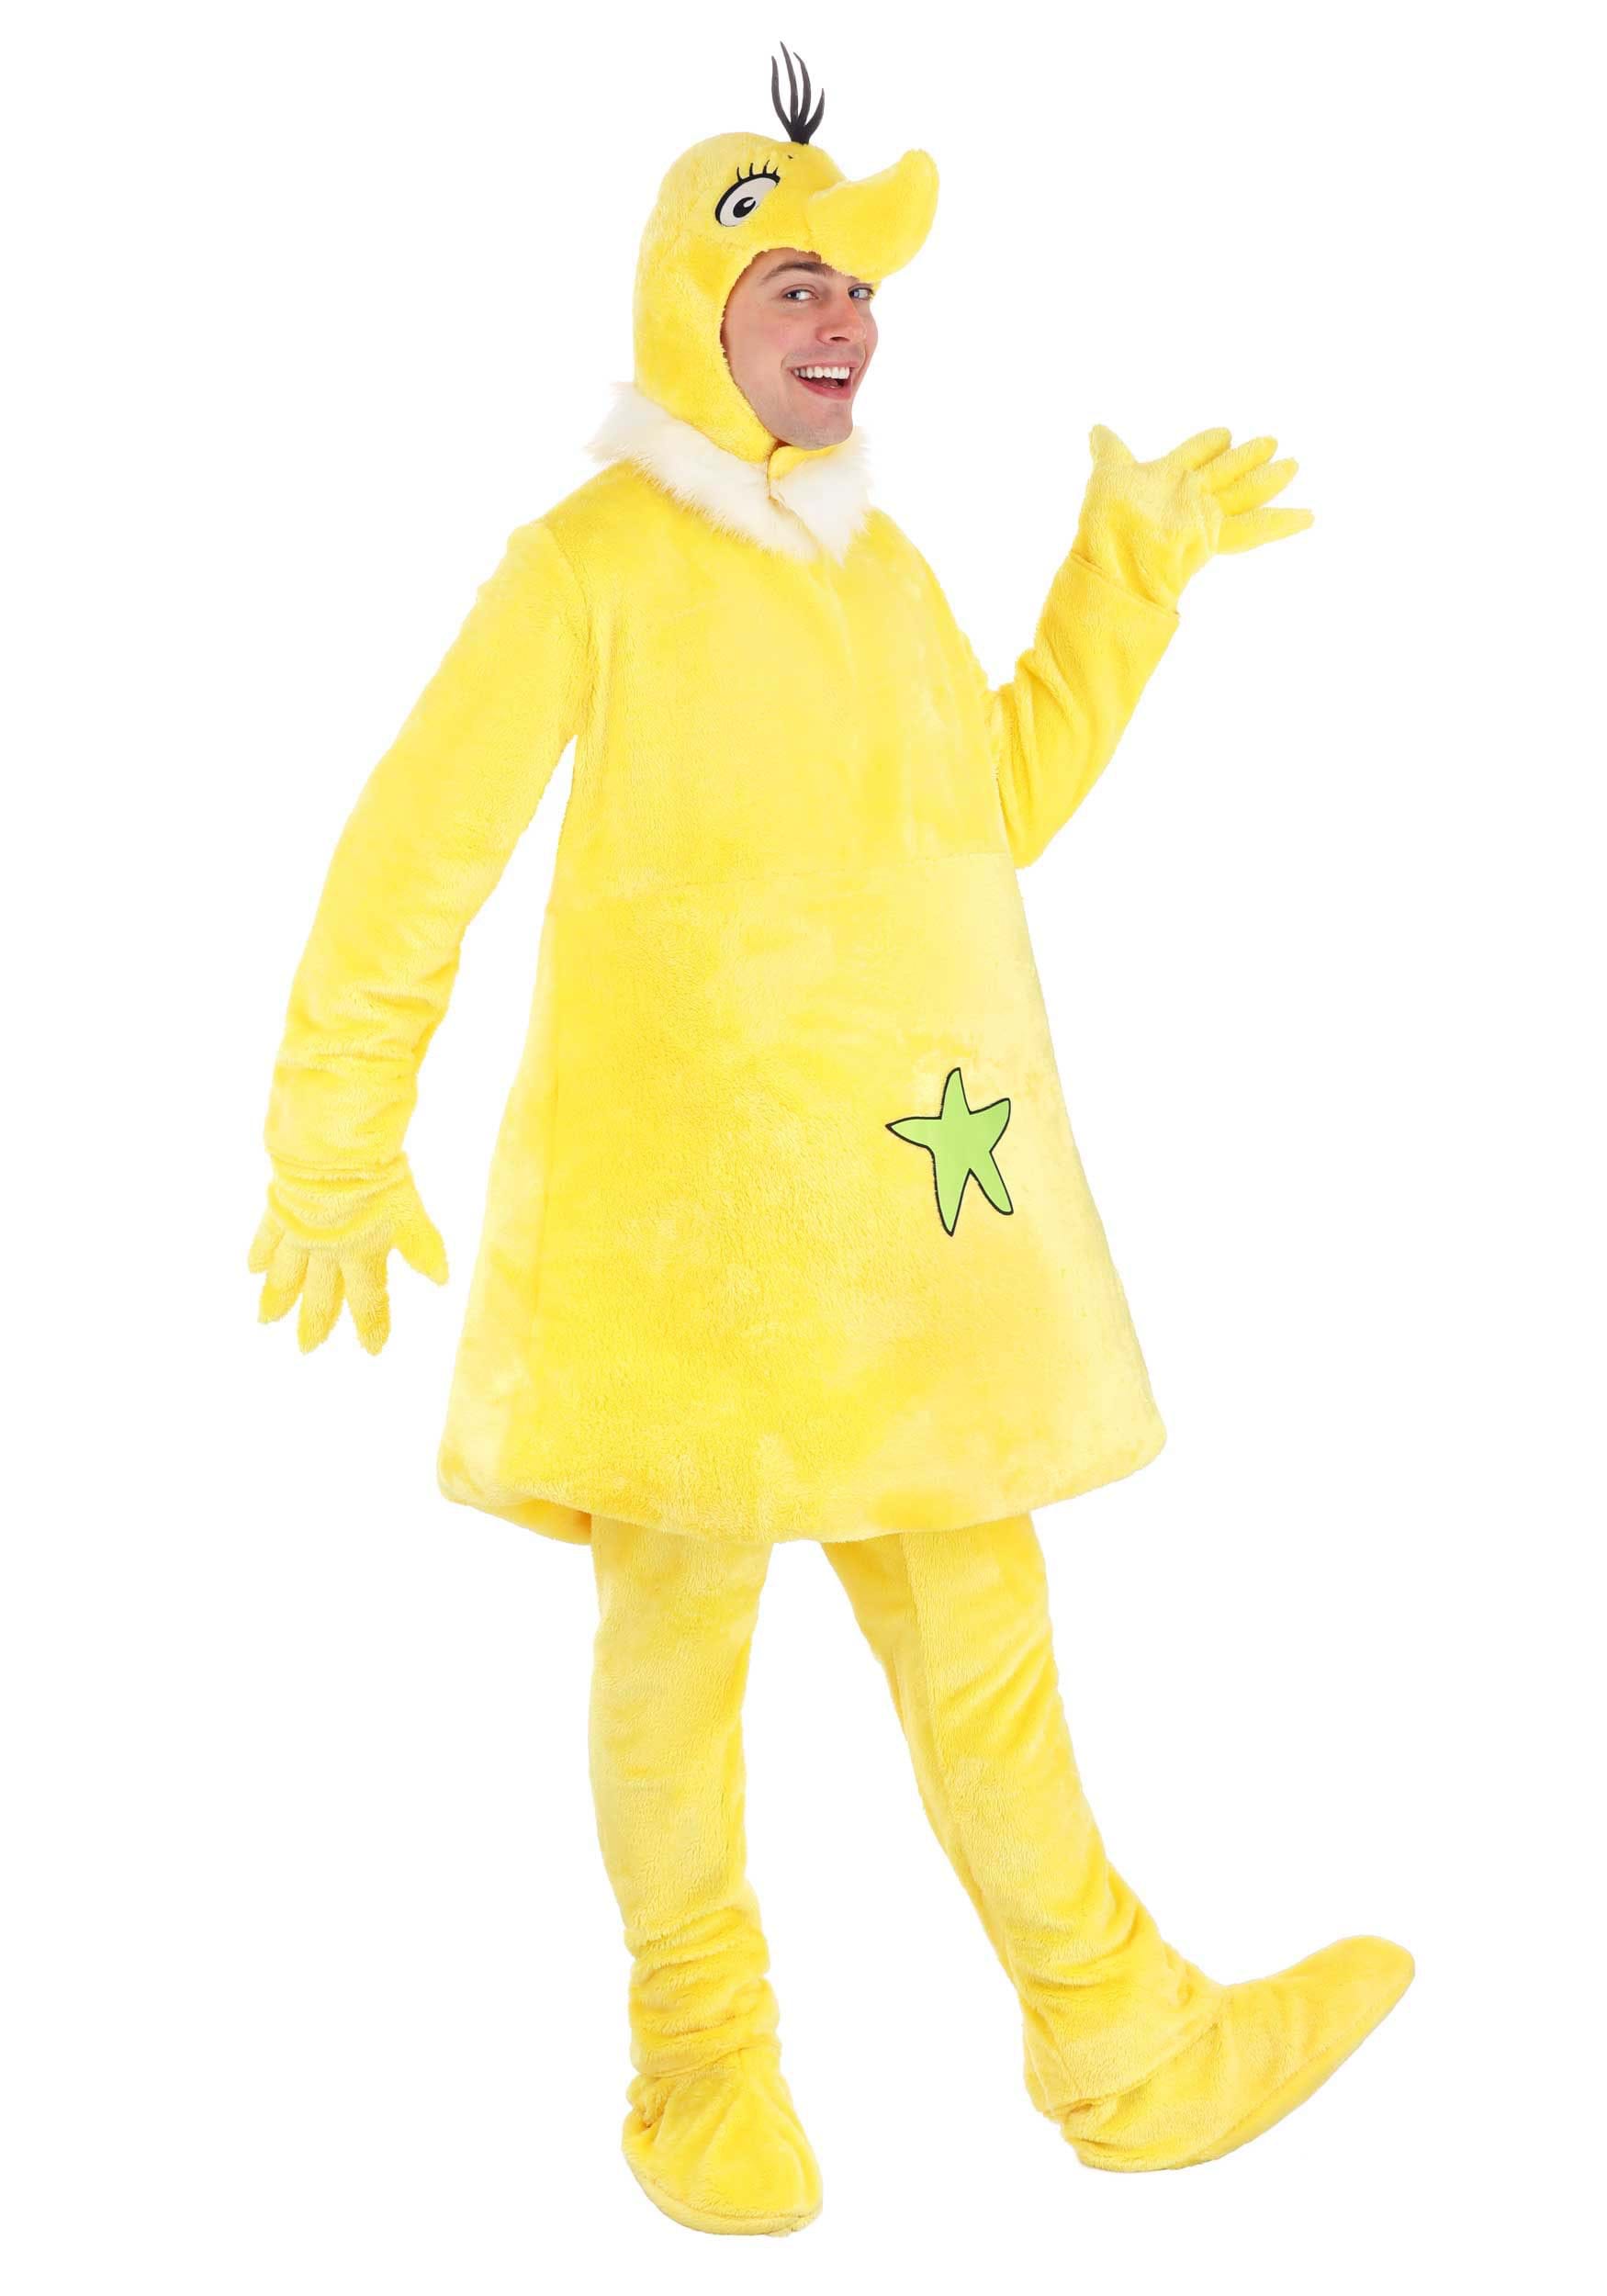 Image of Dr Seuss Star Bellied Sneetch Costume for Adults ID EL453112AD-XL